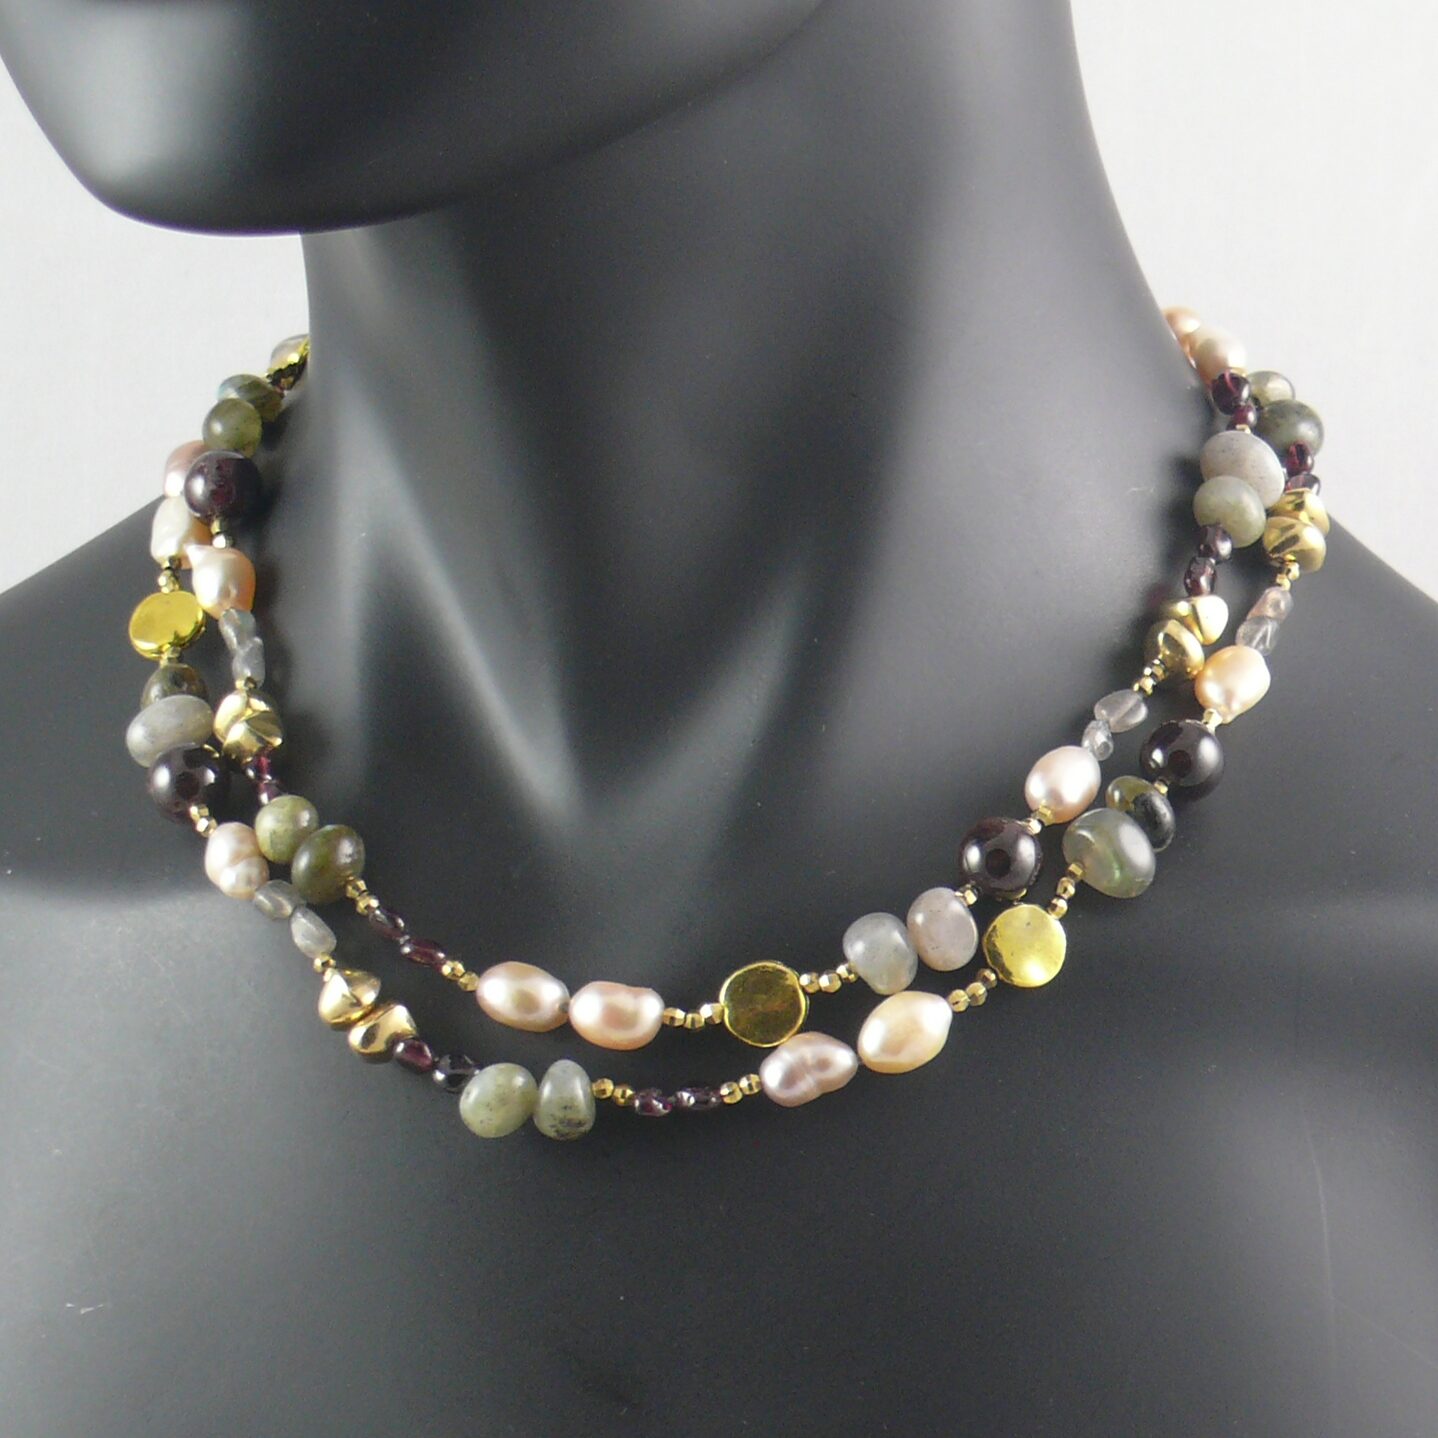 Pink Pearl, Labradorite, Garnet and Brass Bead Necklace | The Real Pearl Co